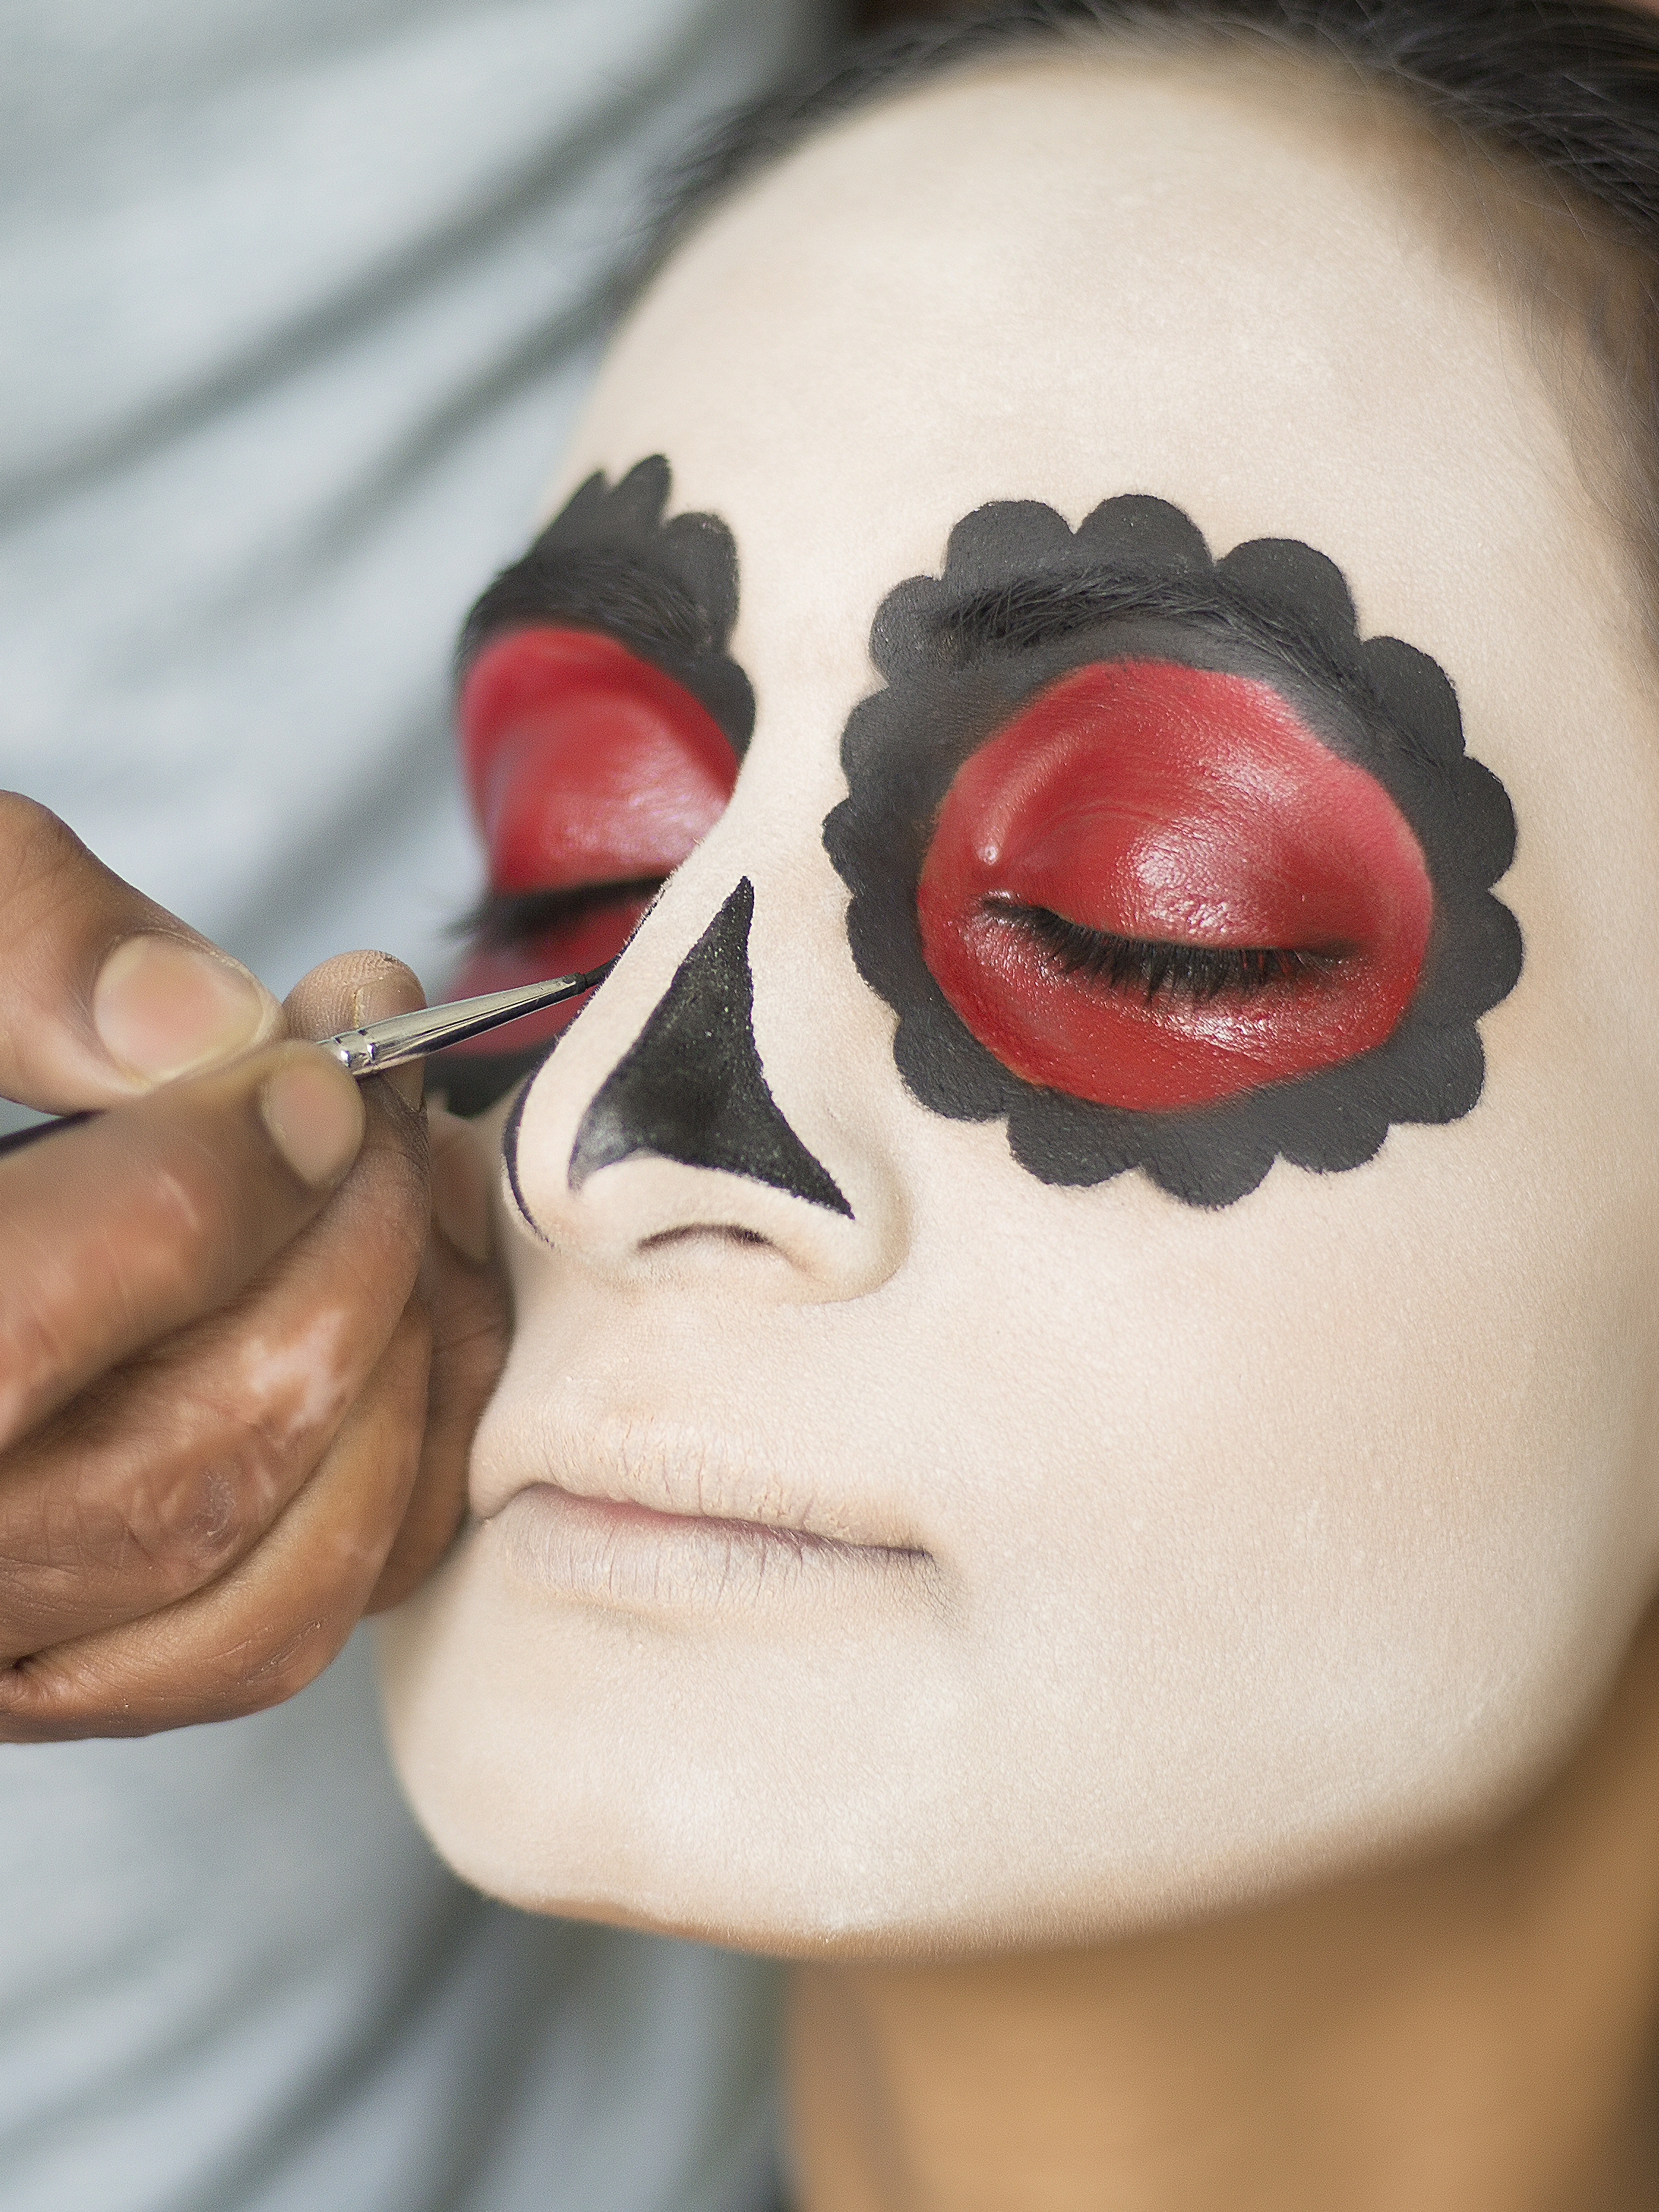 A Step-by-Step Guide to Totally Doable Glam Skeleton Halloween Makeup